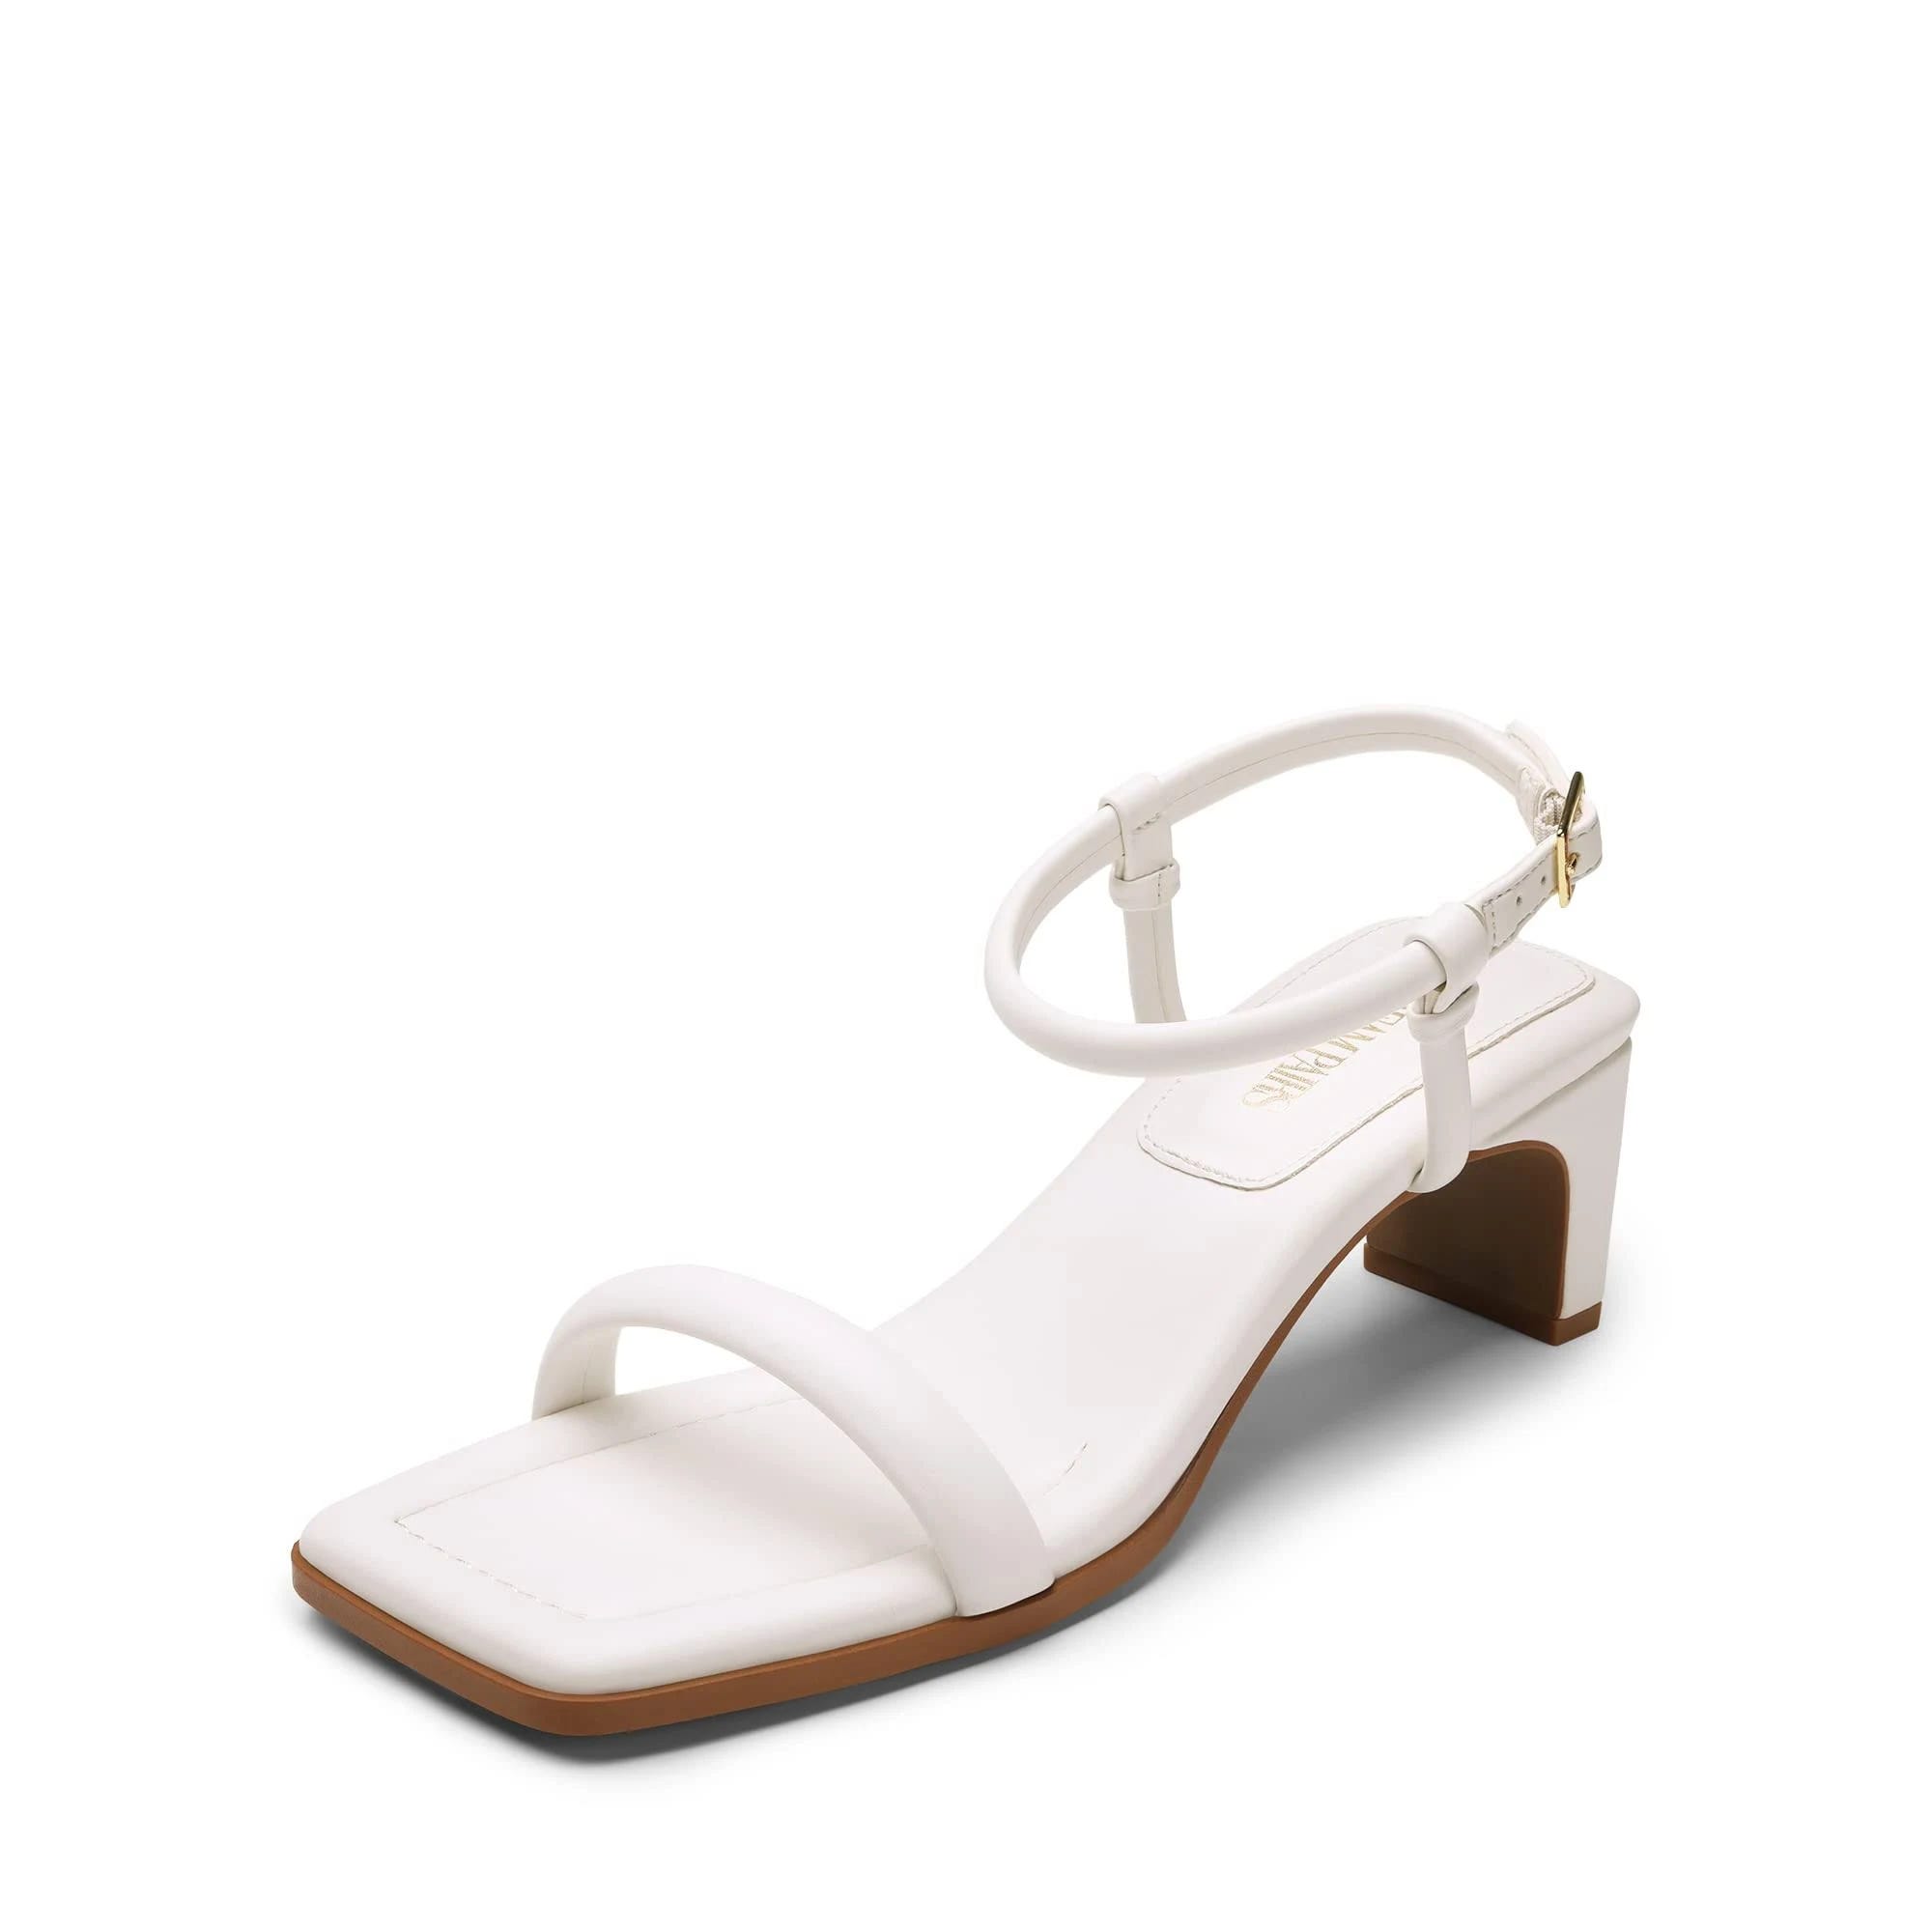 Chic Ankle-Strap Heeled Sandals by Dream Pairs: Retro Style with Comfort | Image